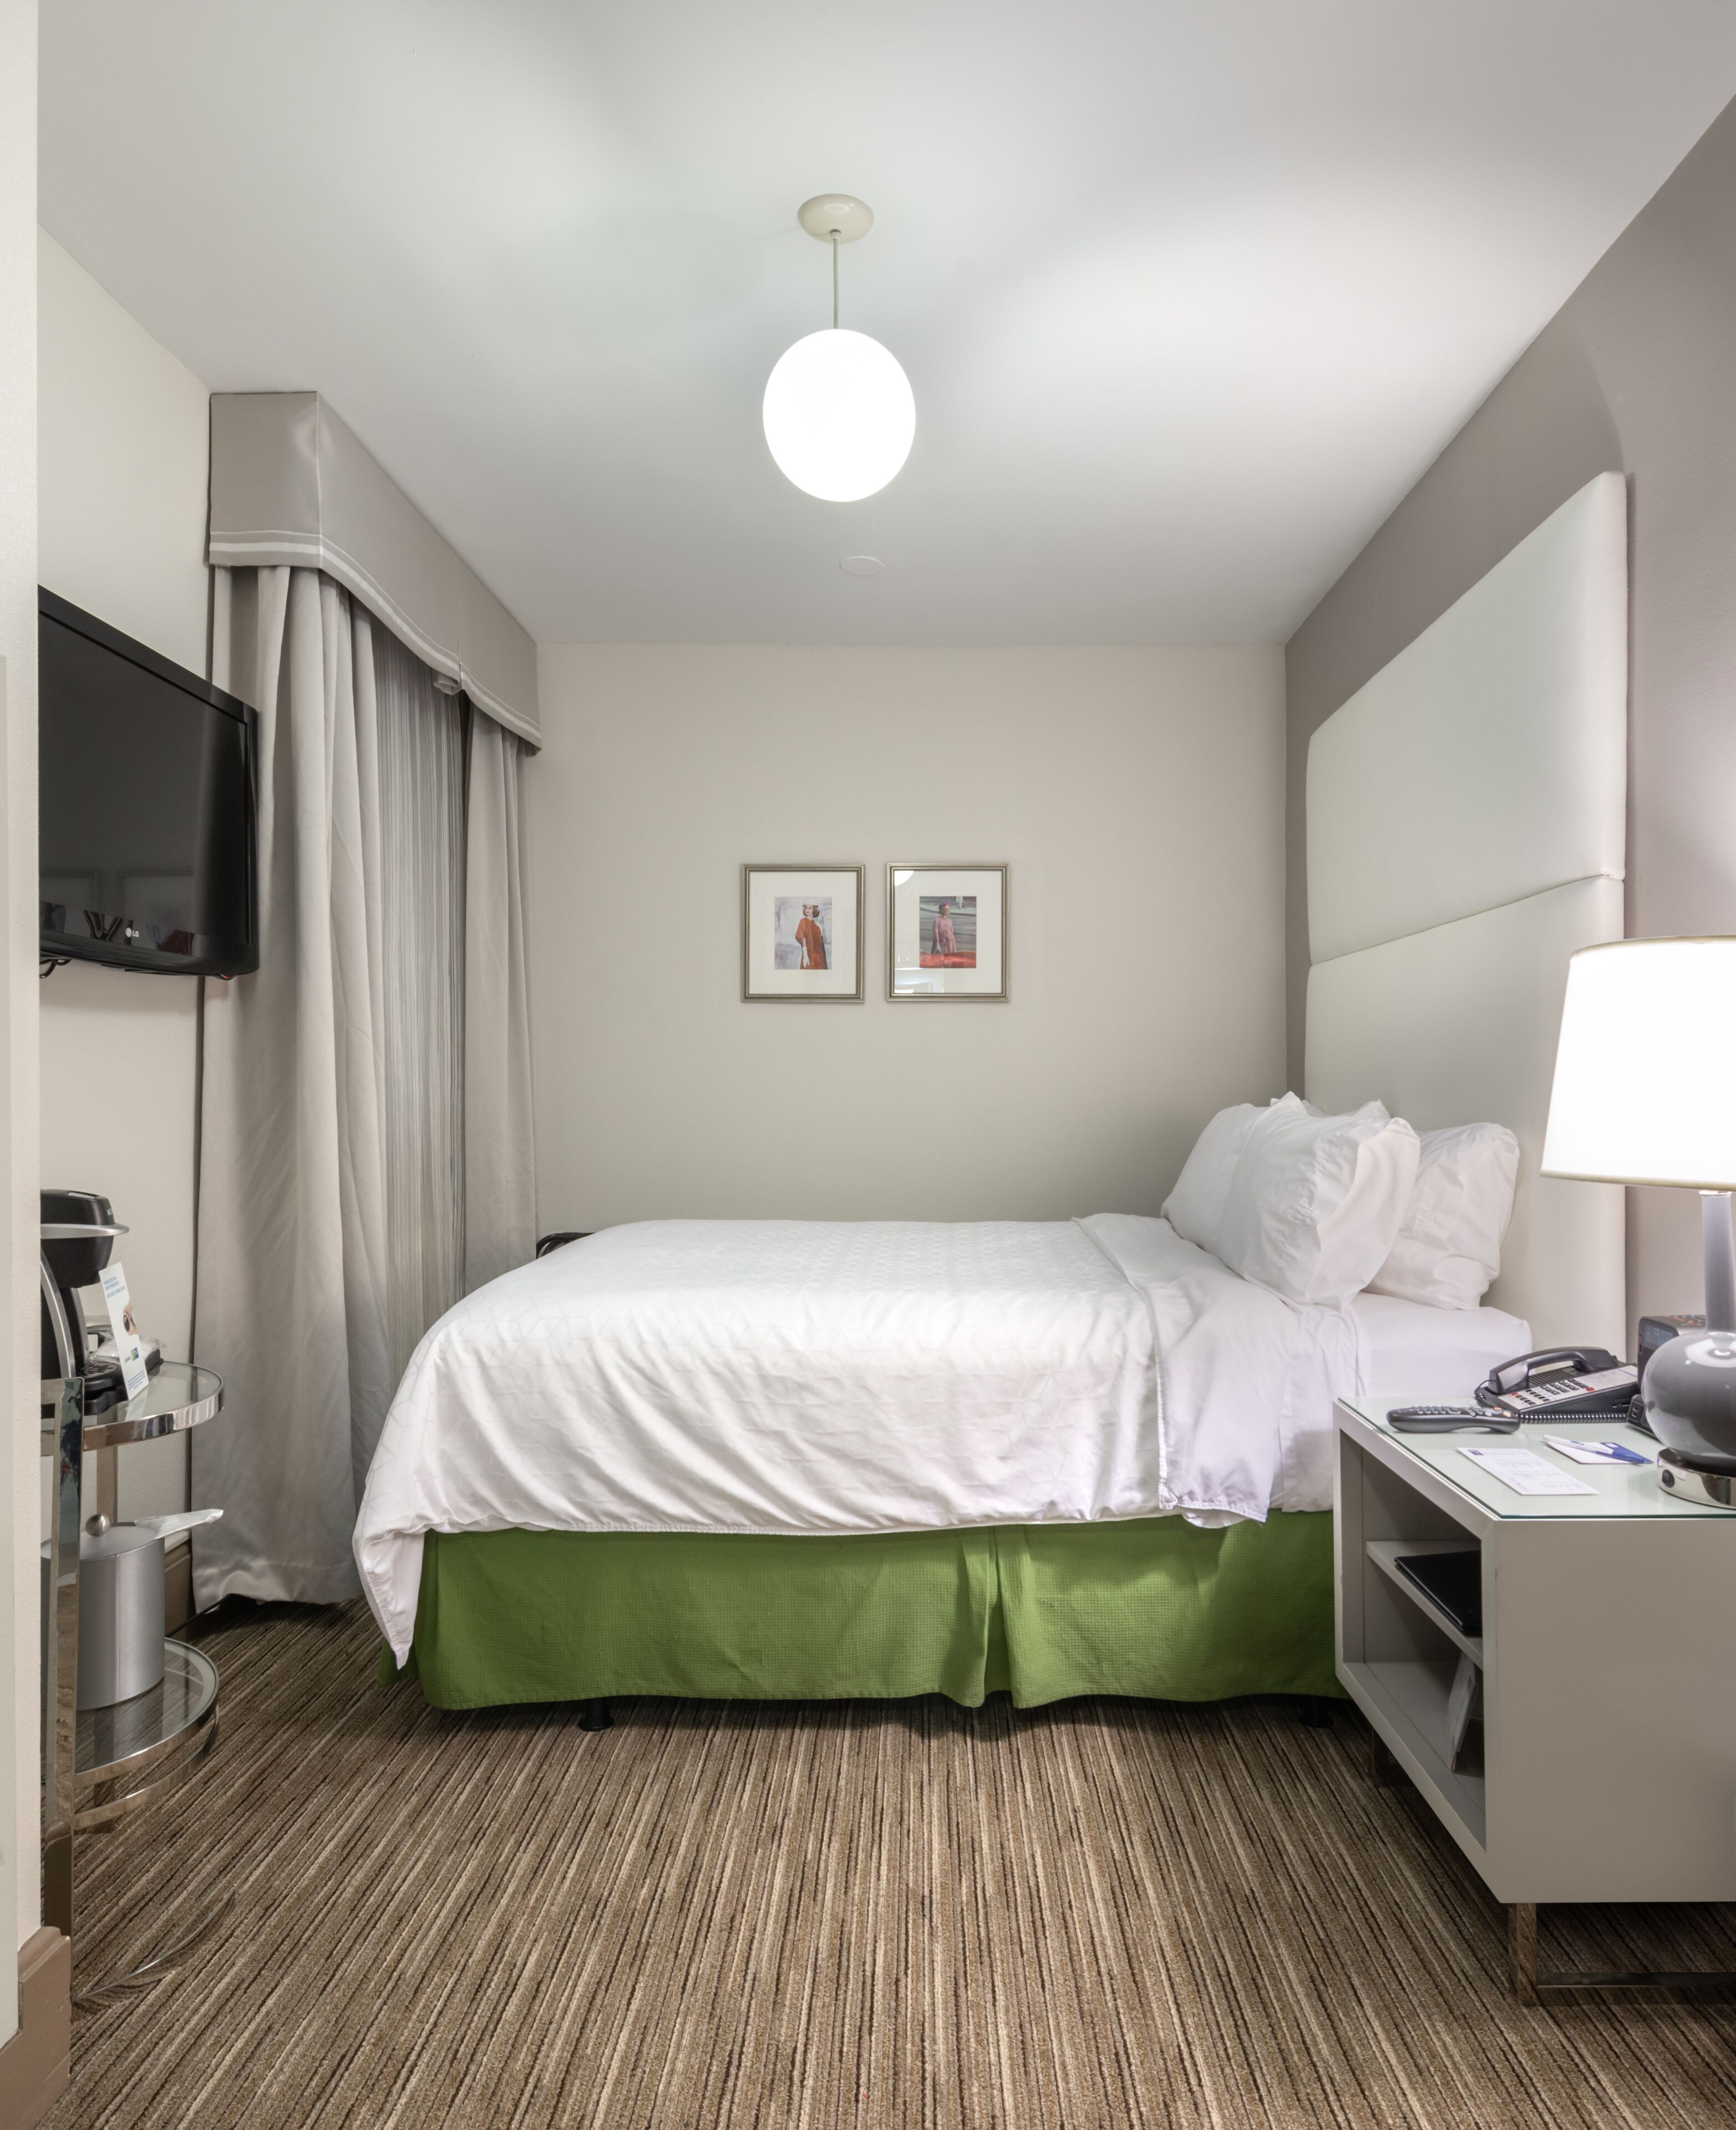 Hotel Cass - A Holiday Inn Express at Magnificent Mile